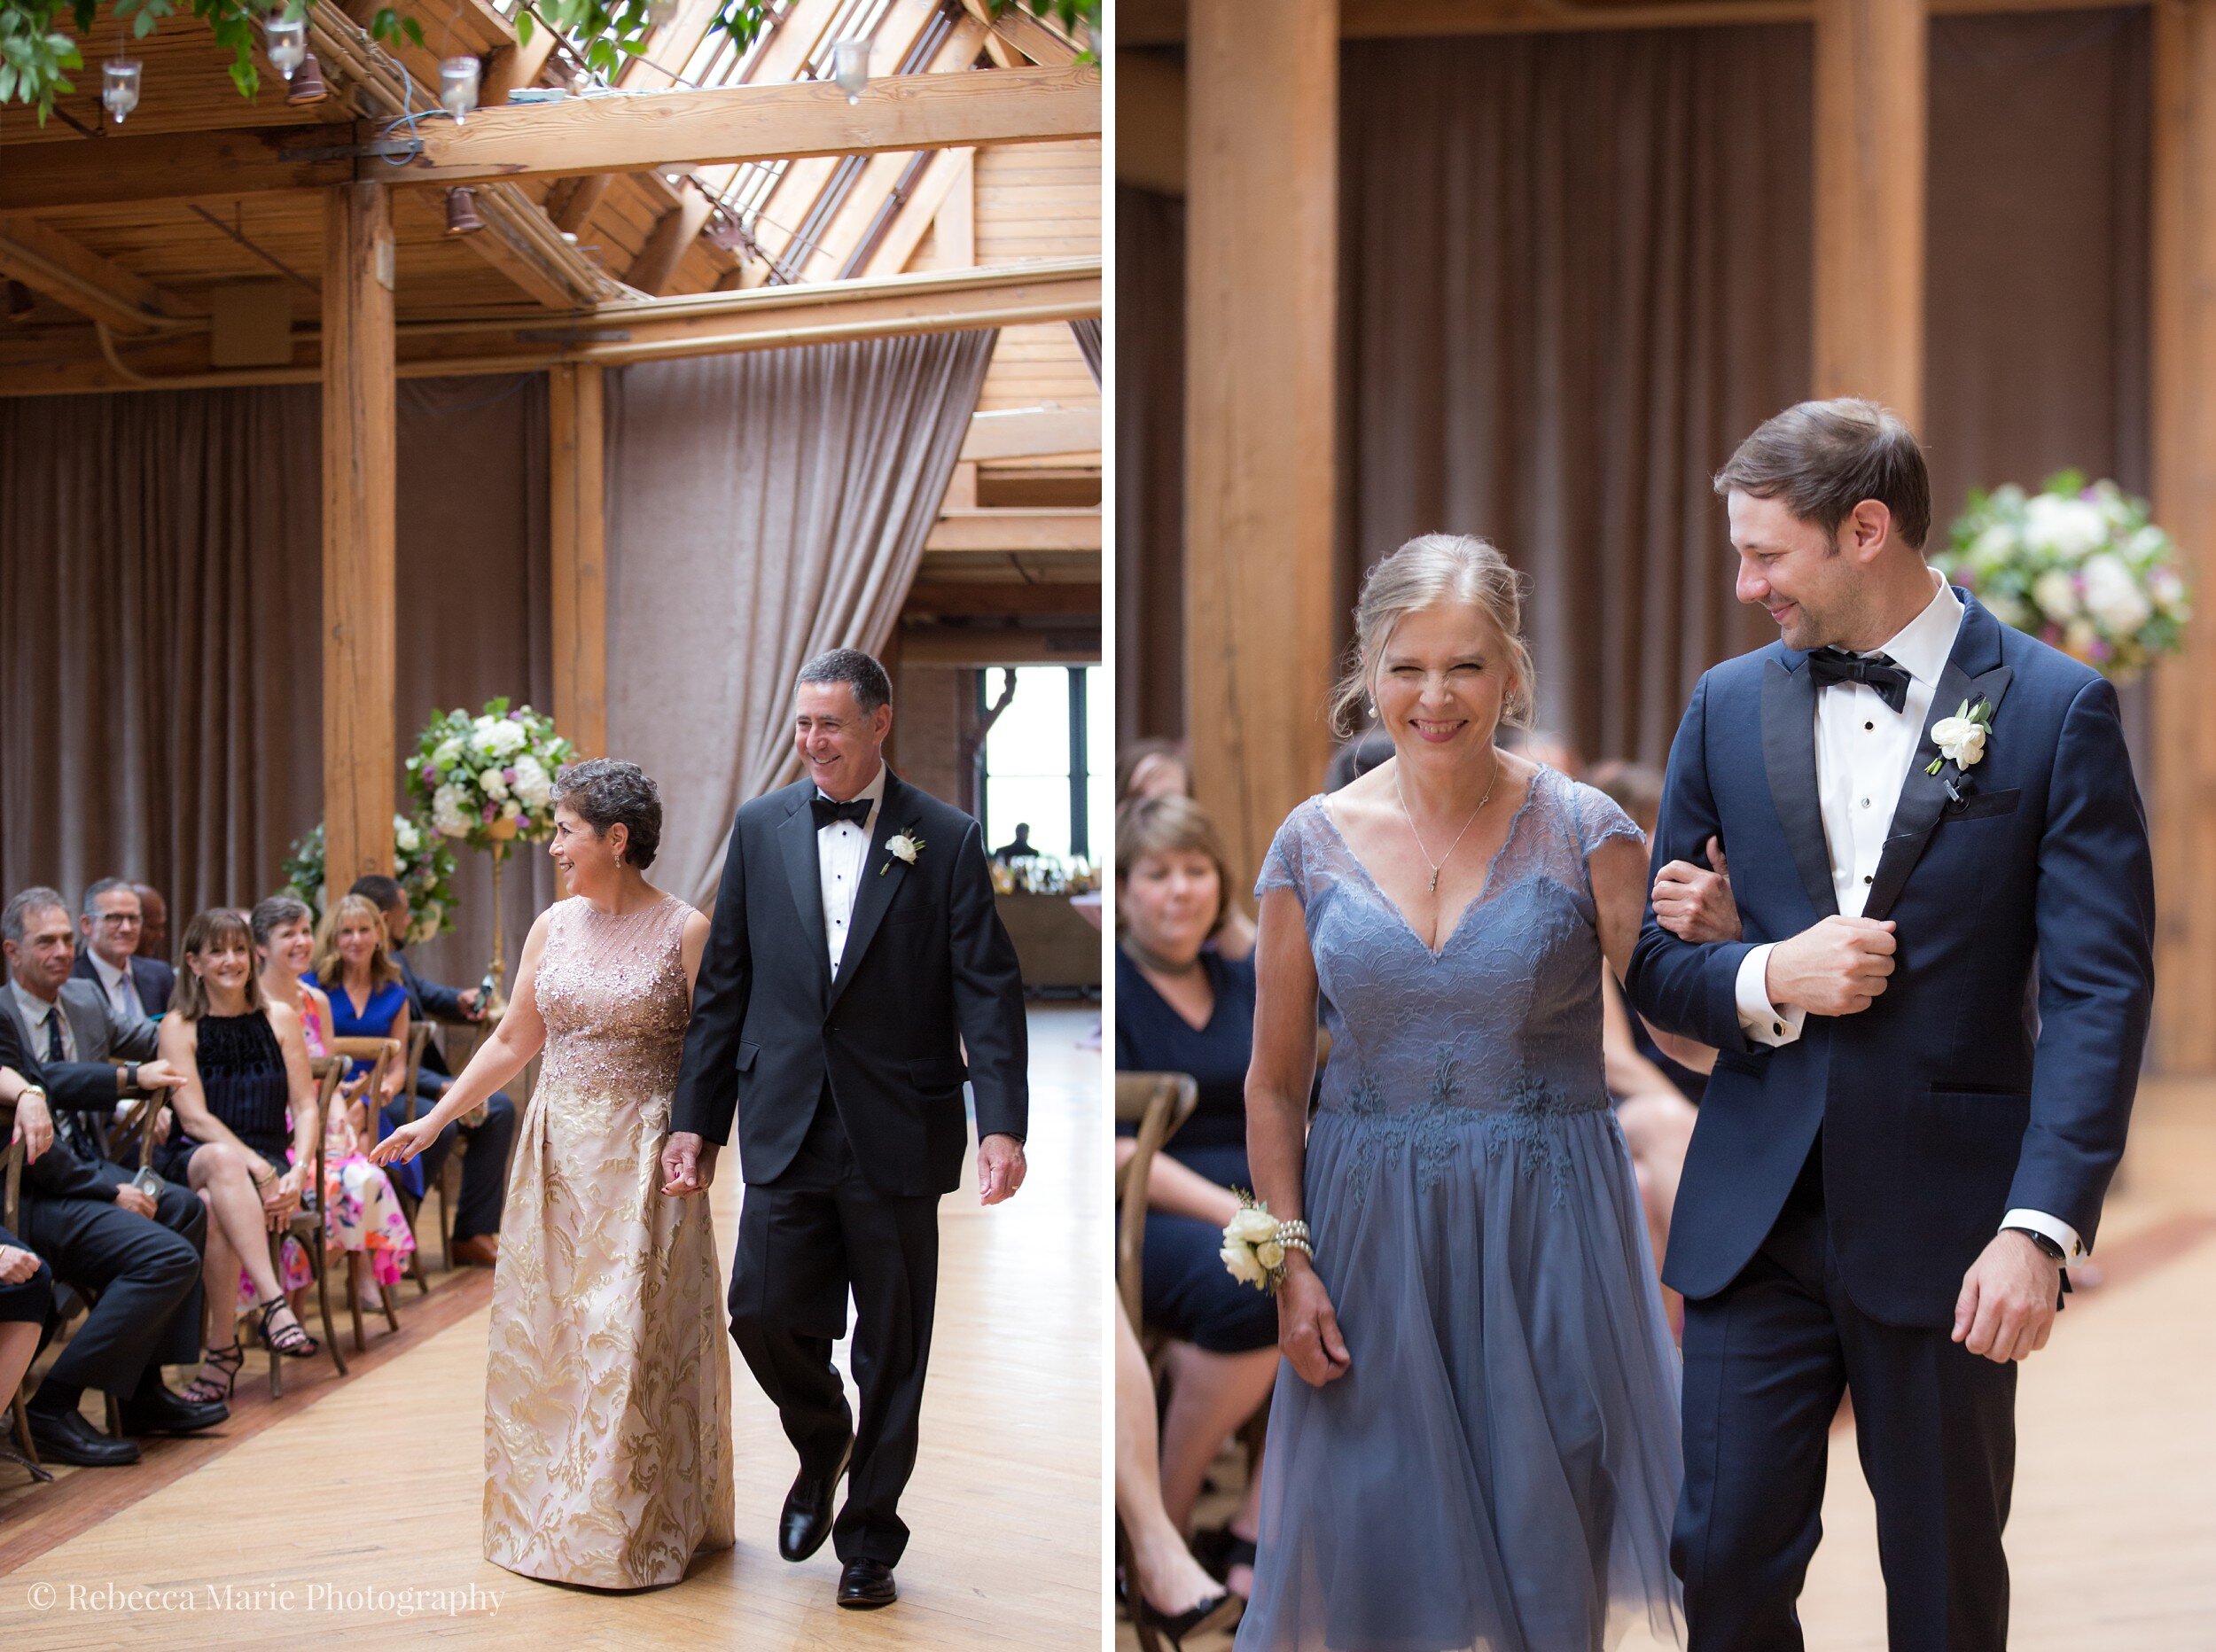 Family processional at indoor Chicago wedding